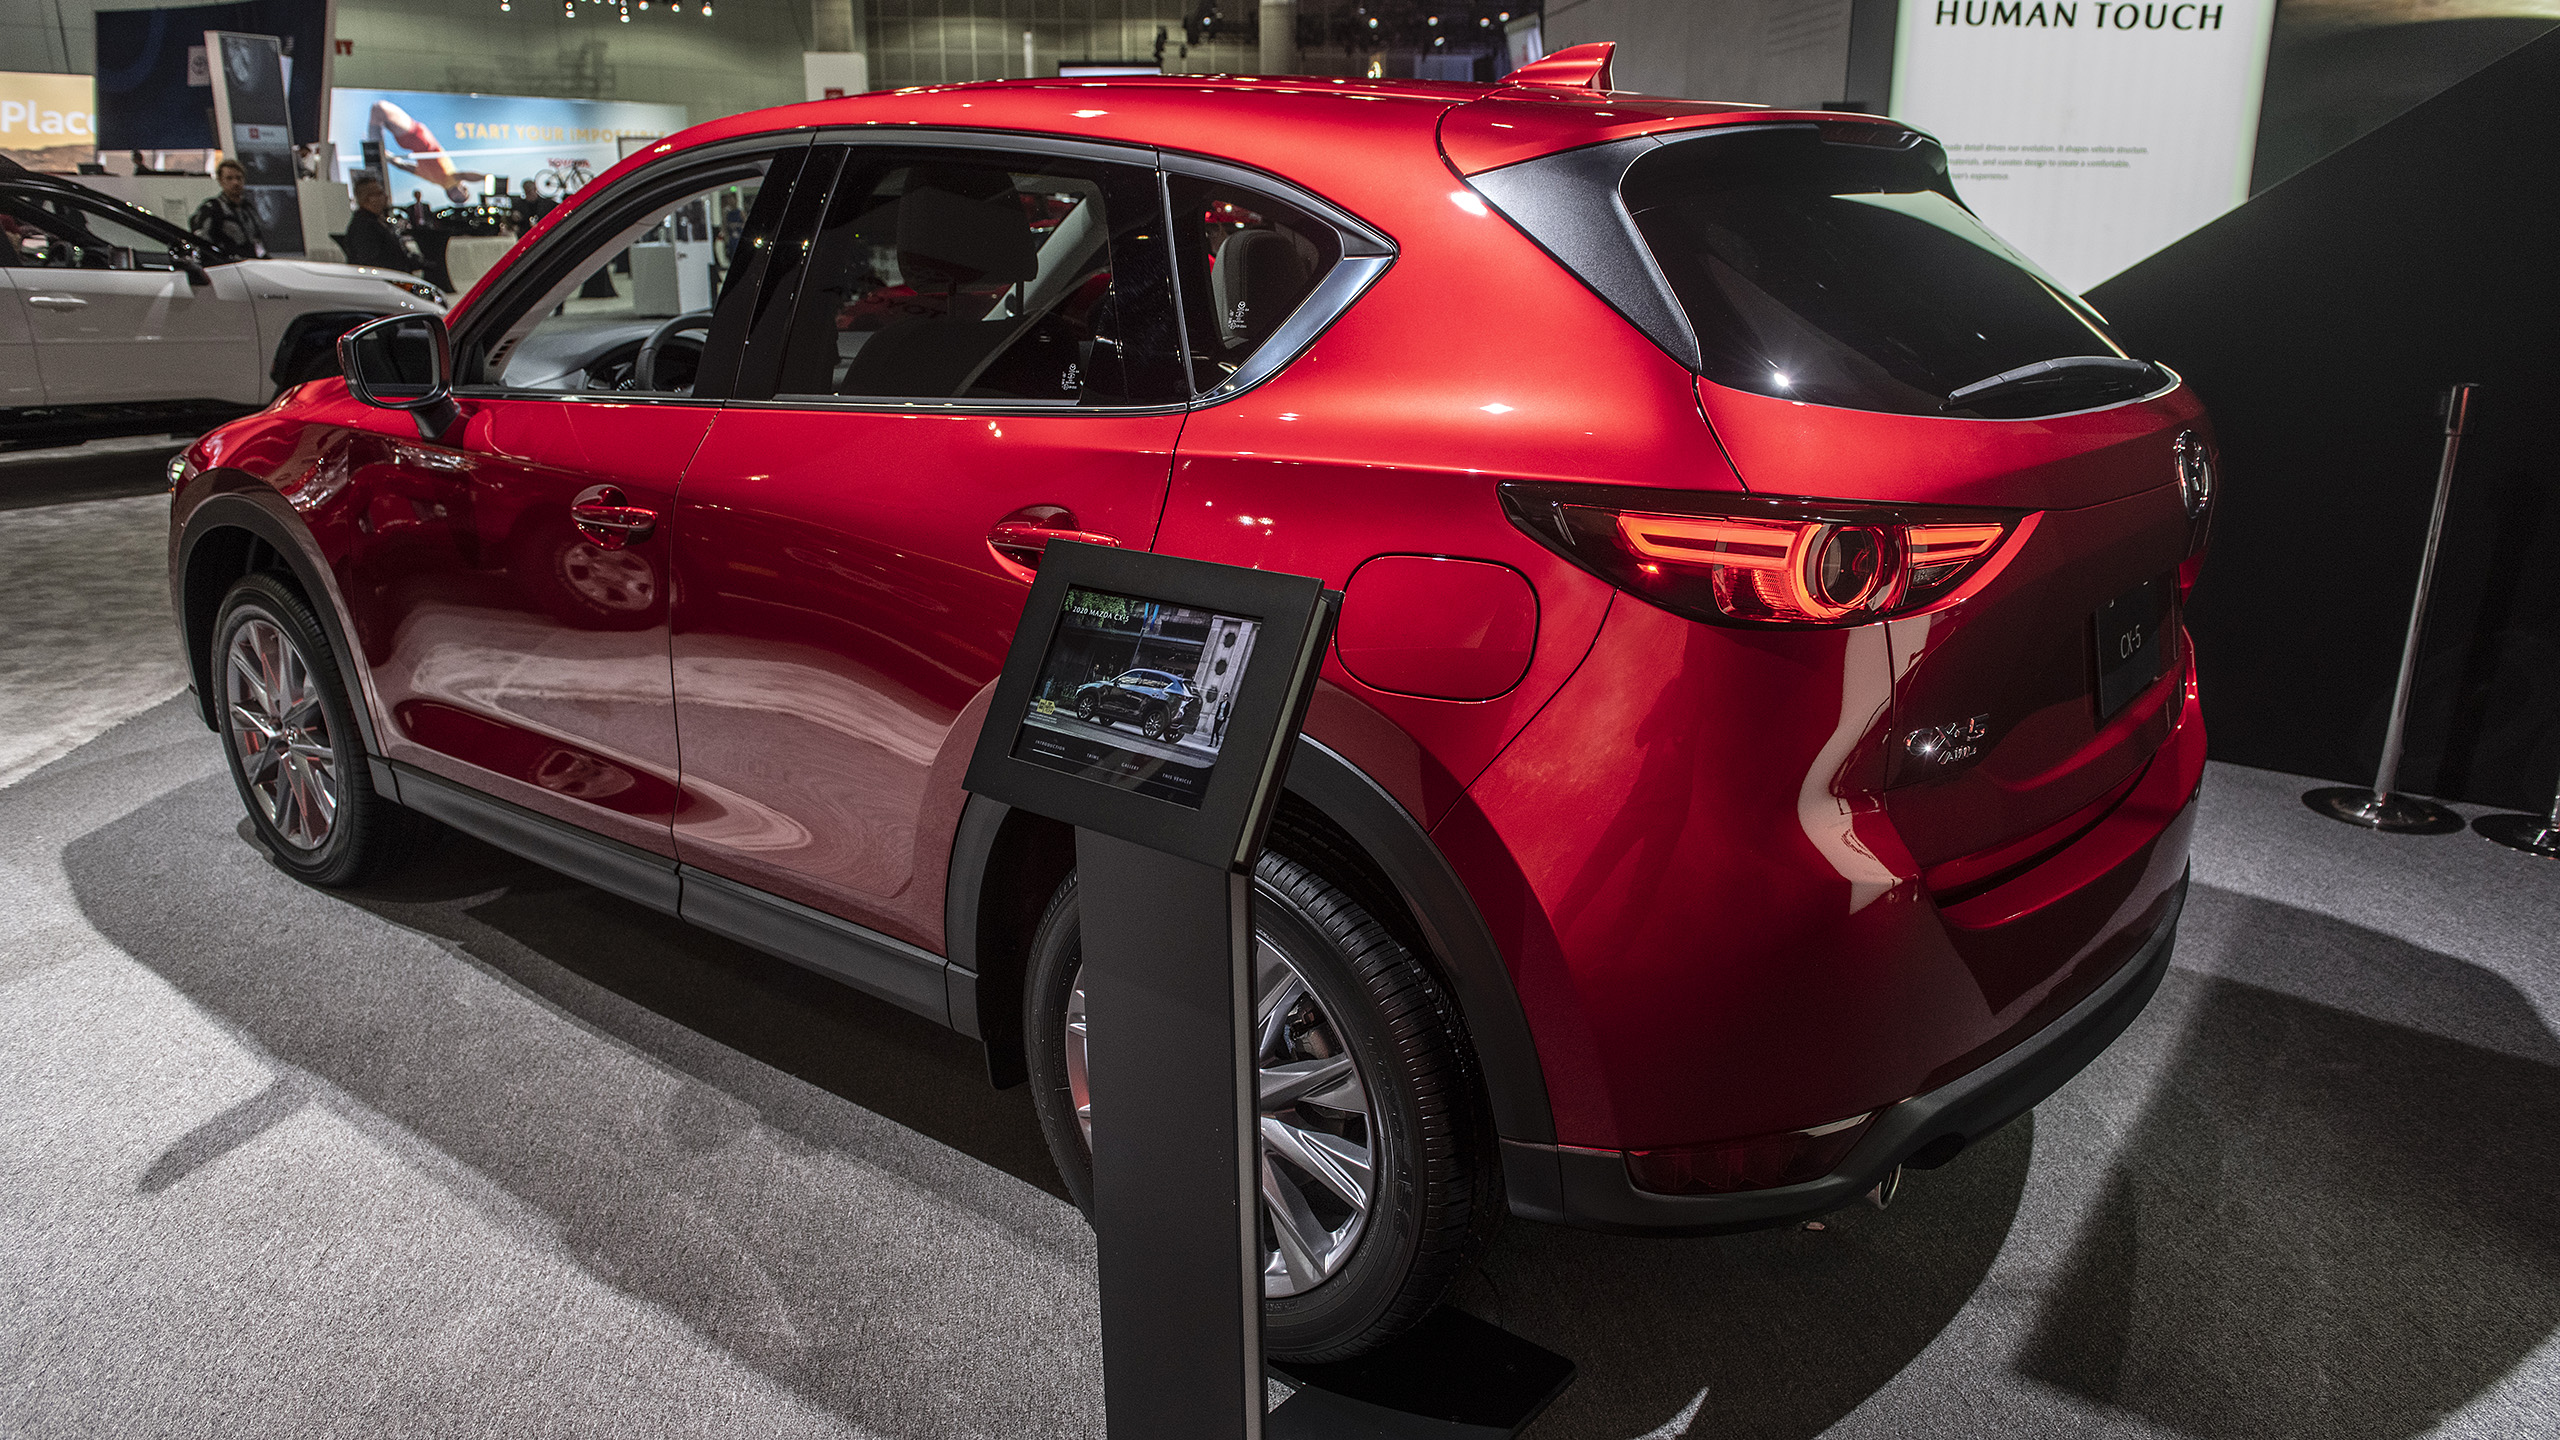 2020-mazda-cx-5-gets-a-light-update-with-more-power-and-a-higher-price